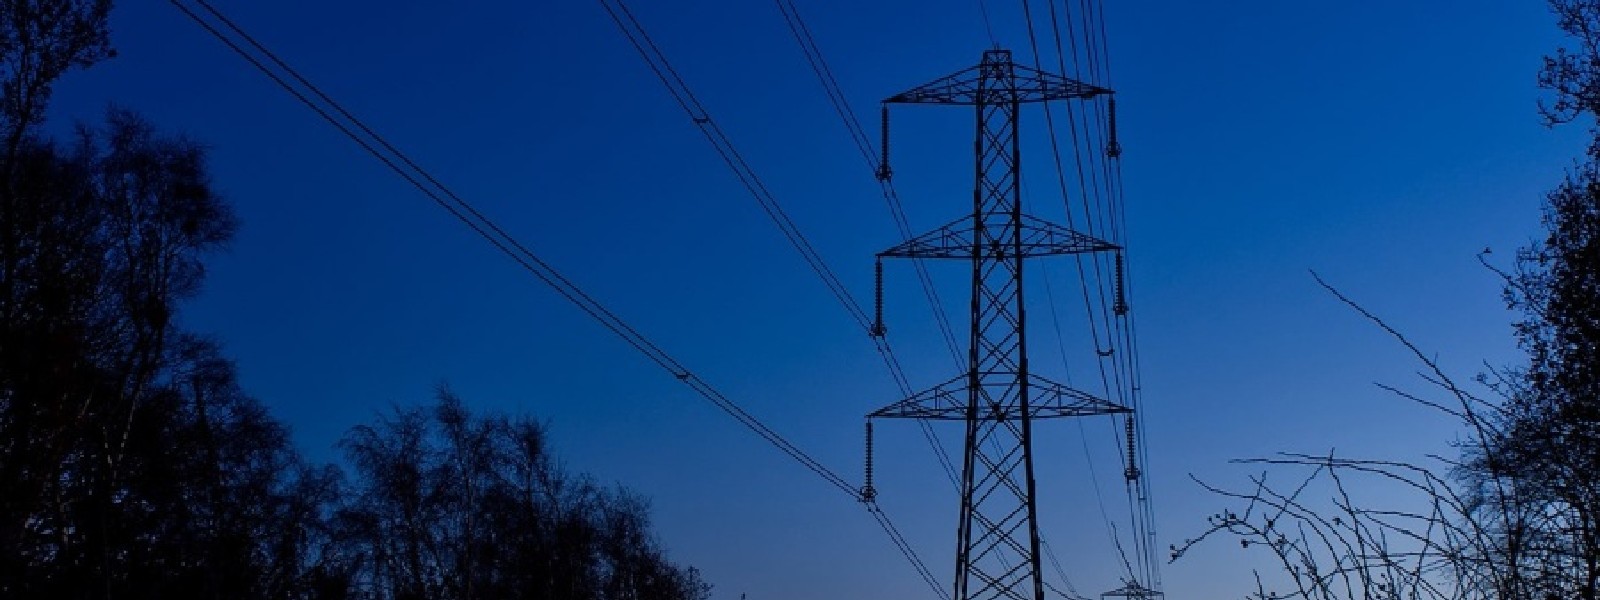 3-Hour Power Cuts from 16th – 19th